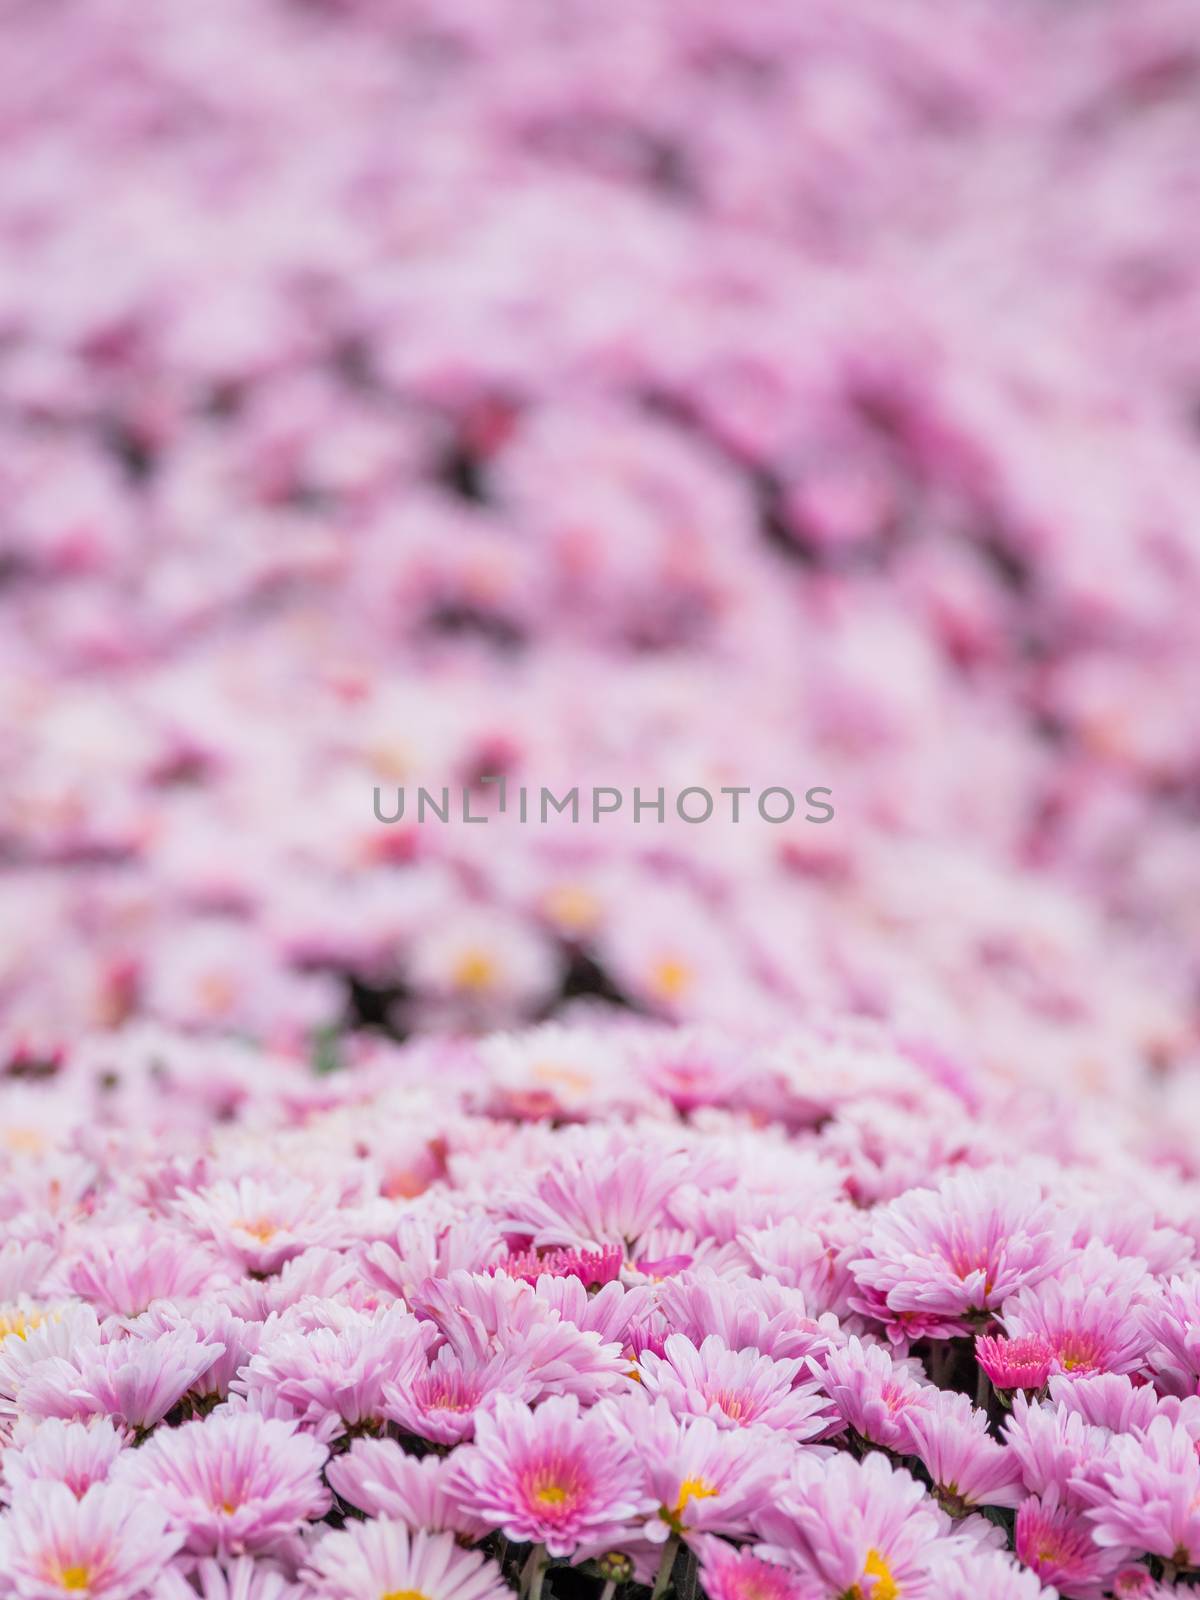 Large outdoor flower beds with pink chrysanthemums.